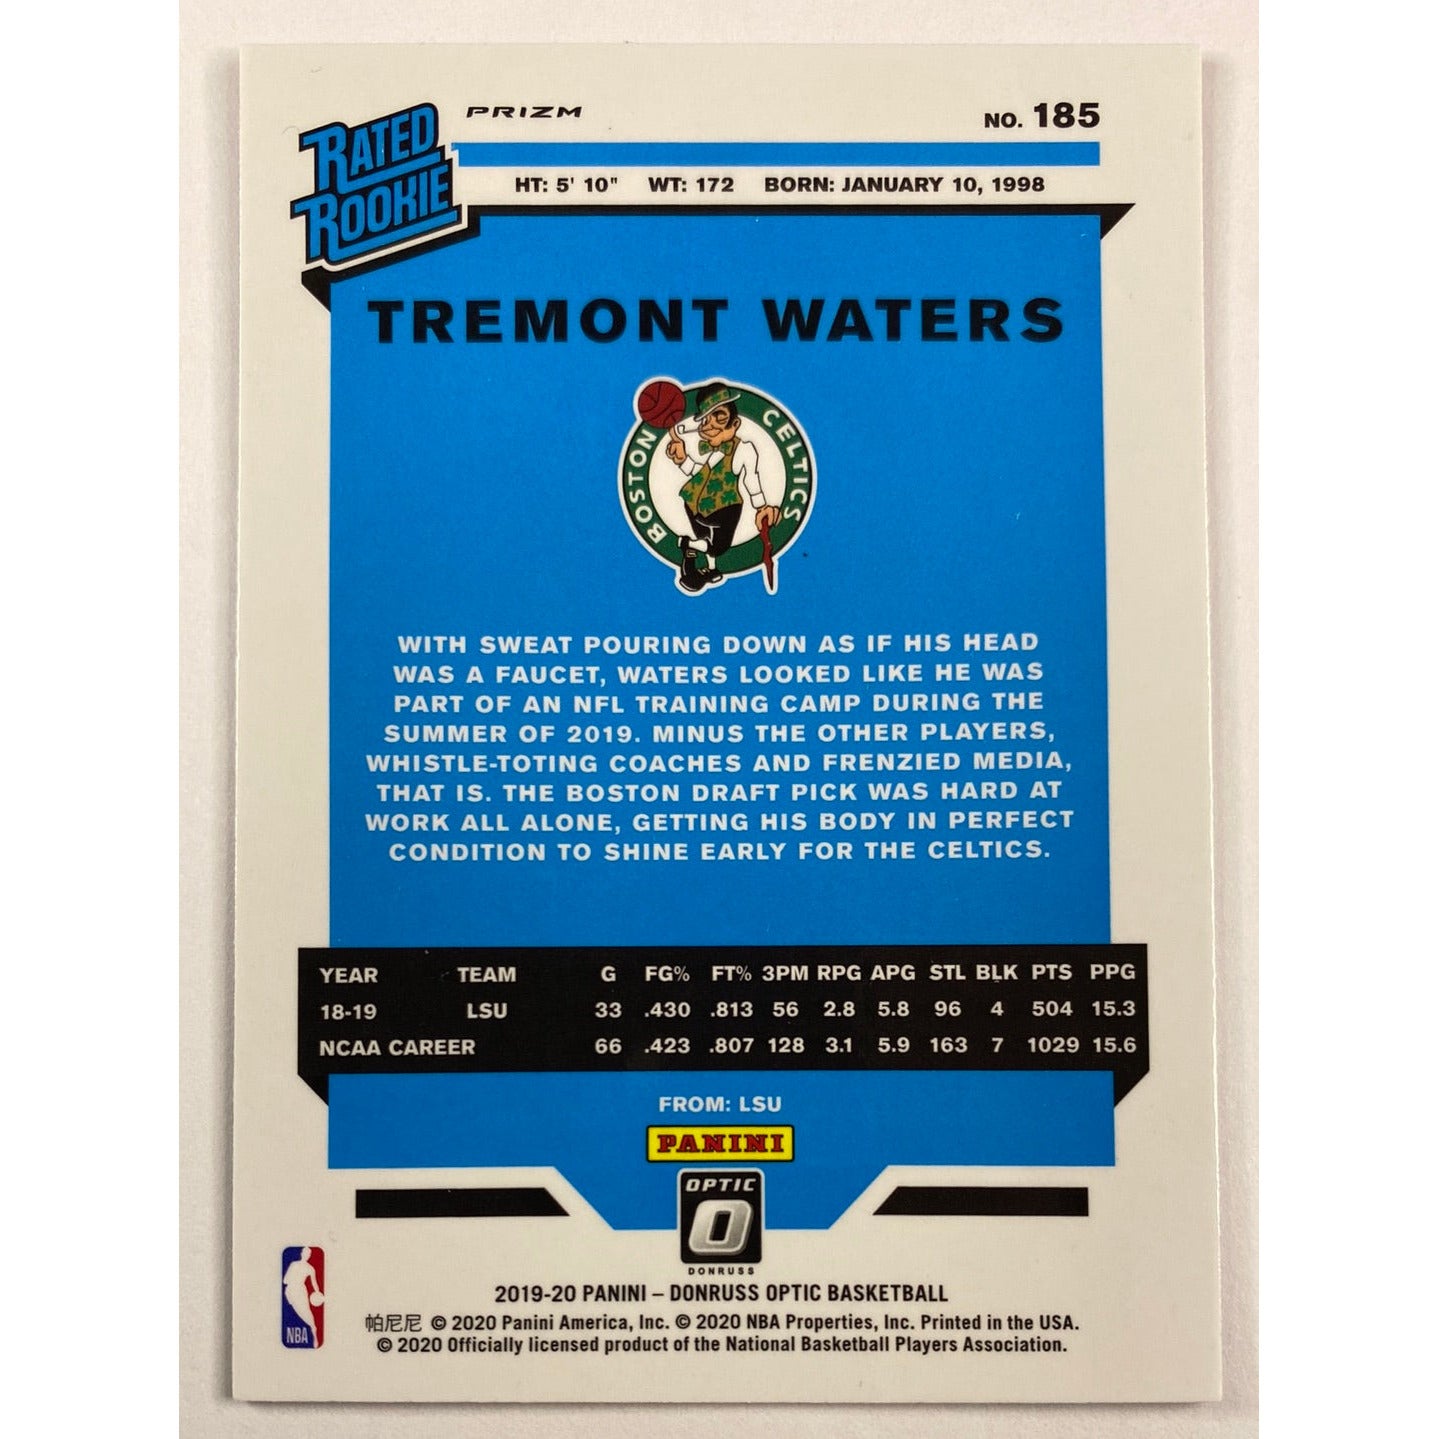 2019-20 Donruss Optic Tremont Waters Hyper Pink Rated Rookie